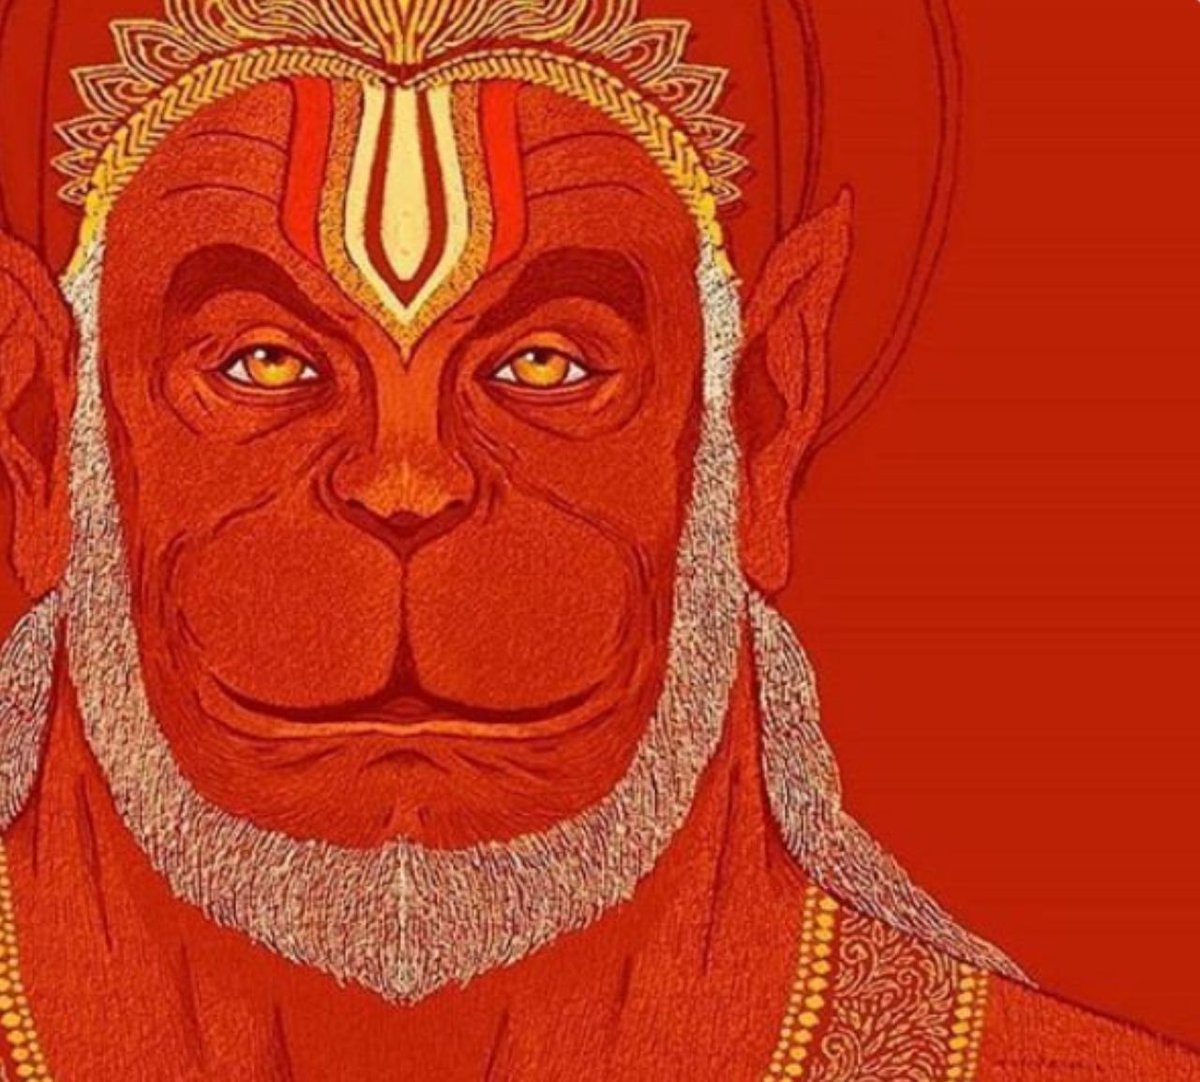 and resurrected and cured all the Vanar warriors and Shri Ram and Laxman. Such was the importance of Hanuman among his friends and army. Reference: VR Yuddha Kand, Ch 74-75